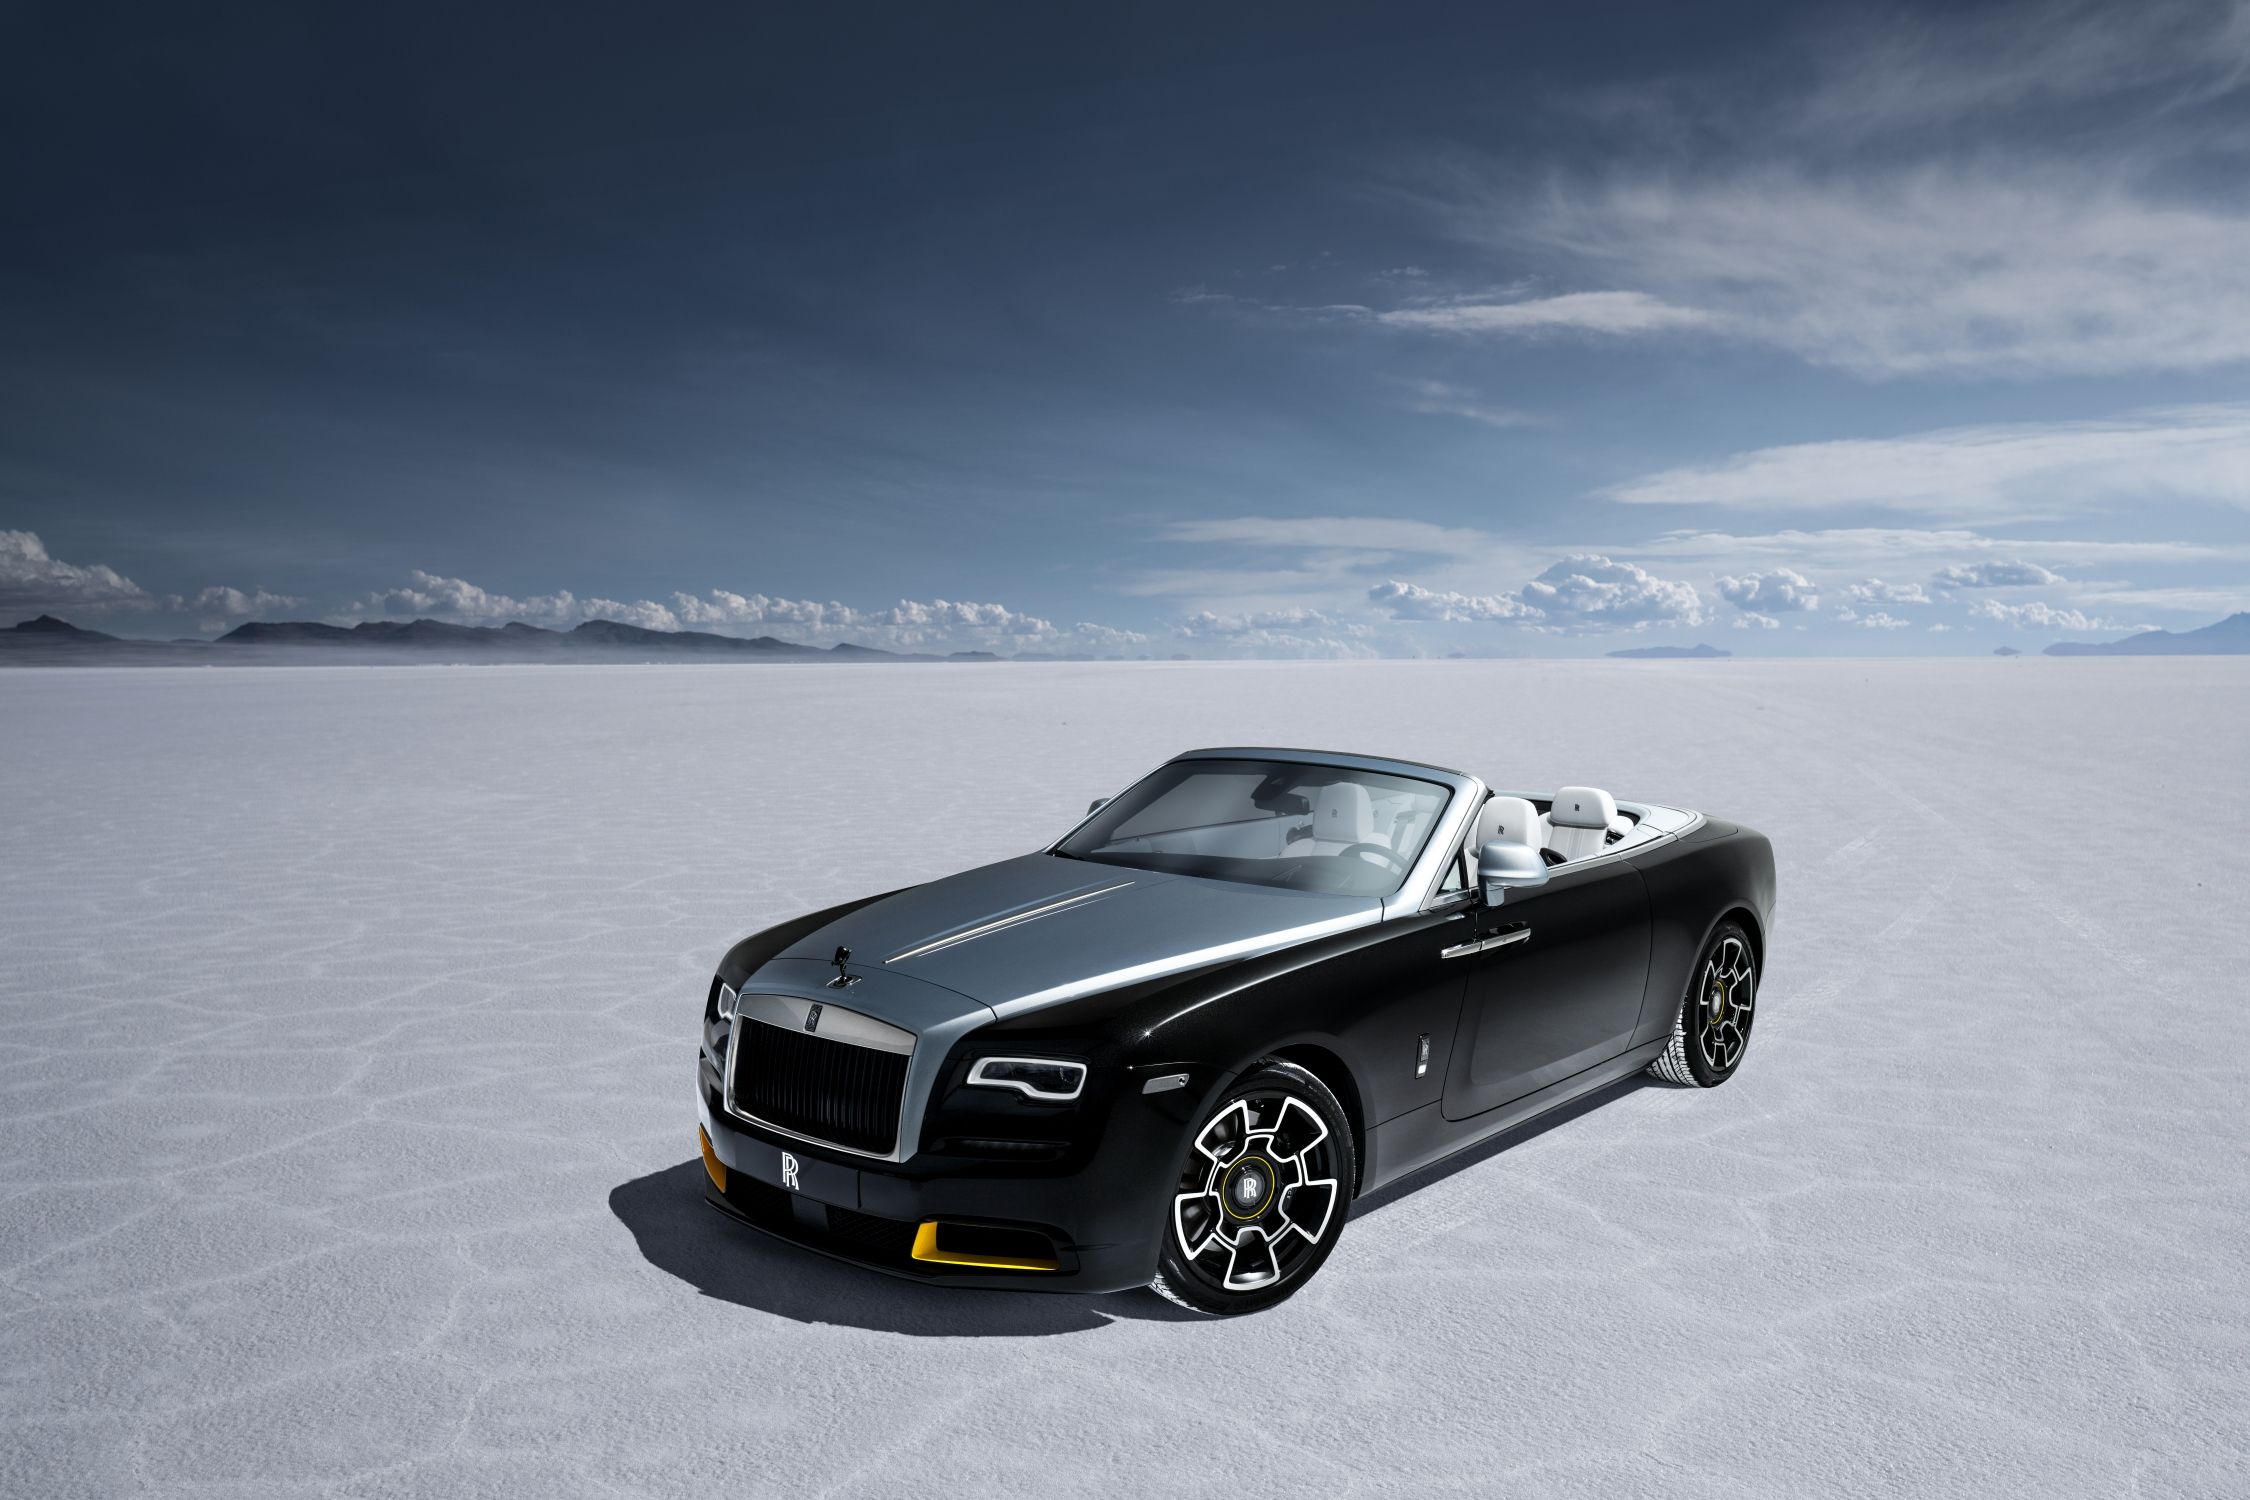 Magnificent speed: Rolls Royce’s New Landspeed Wraith and Dawn